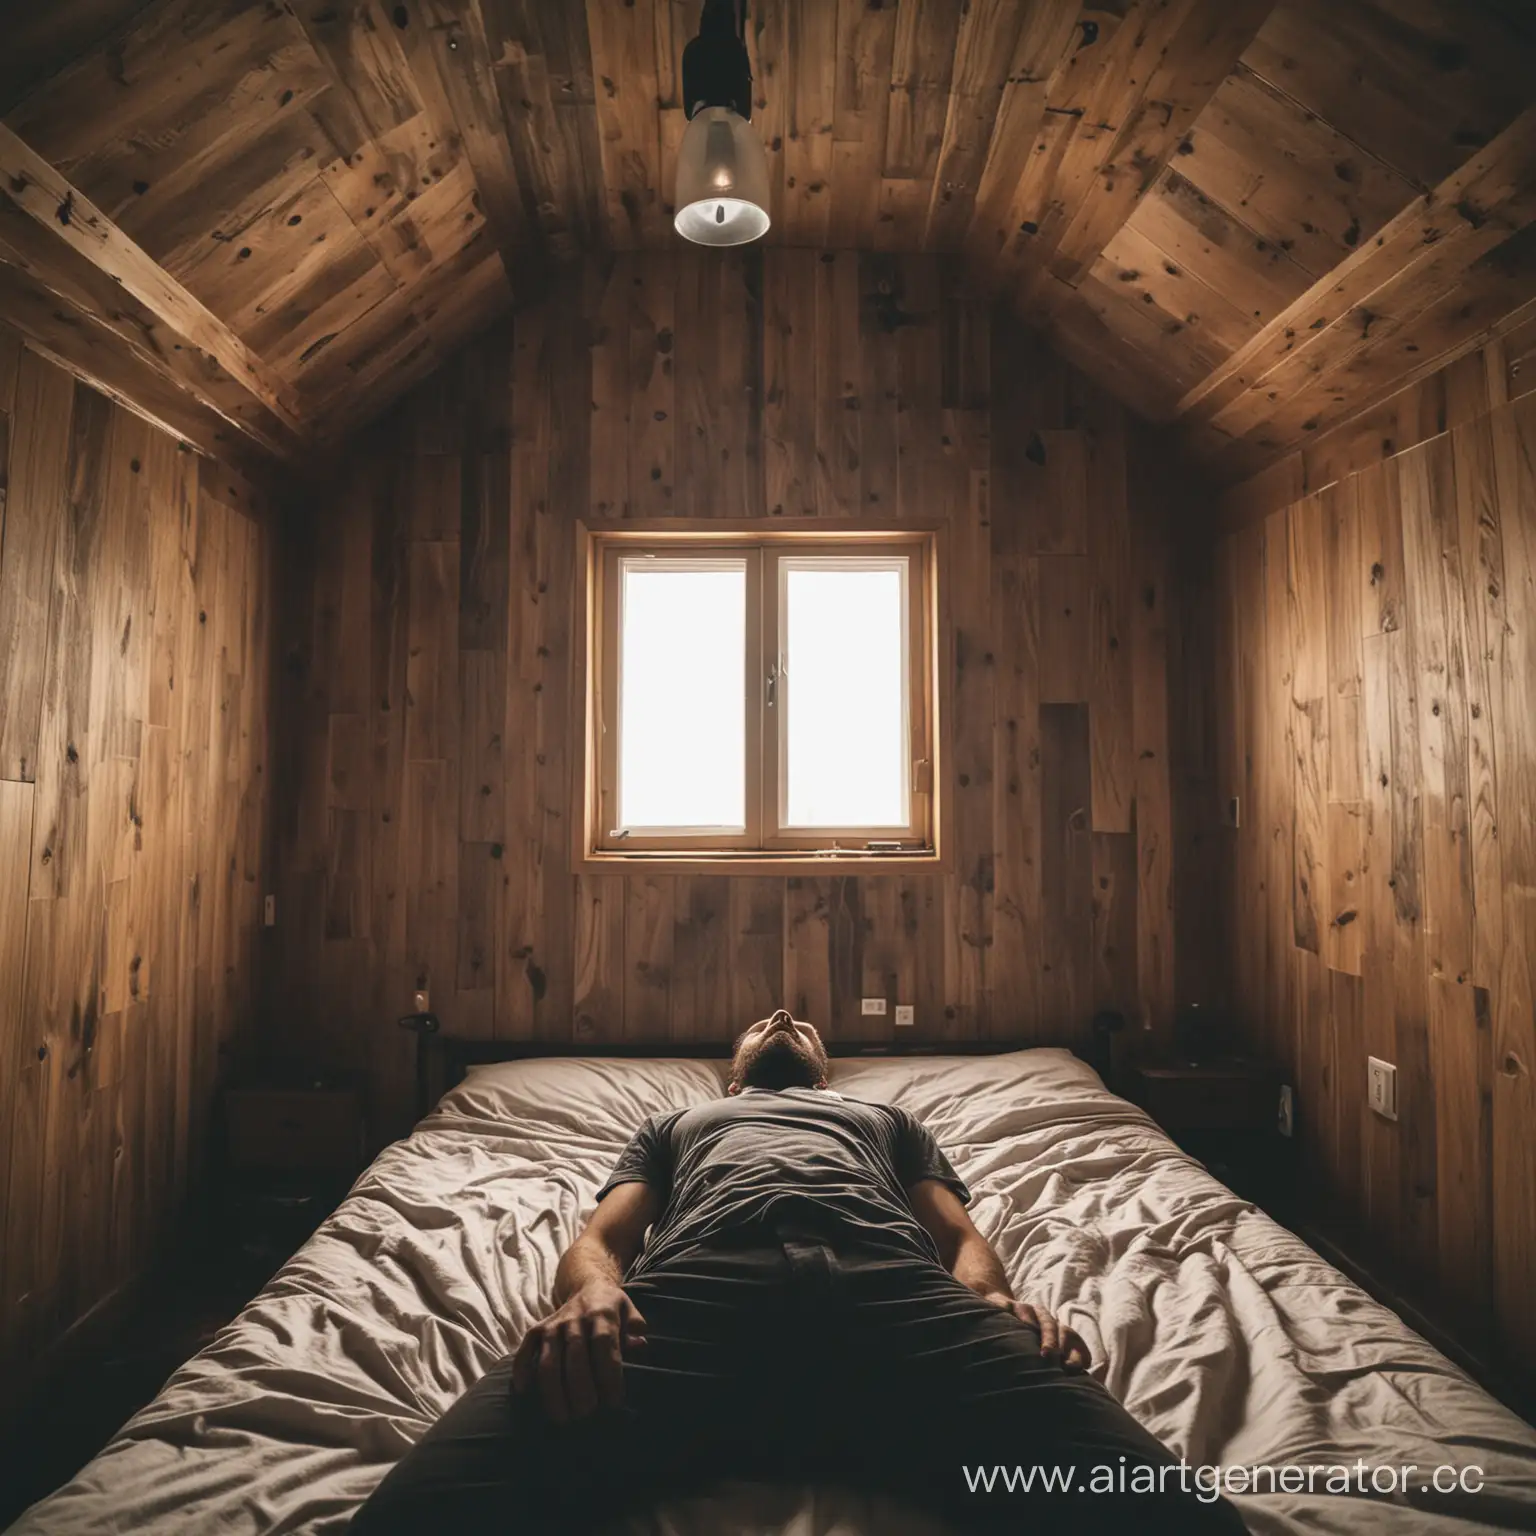 Young-Man-Encounters-Ailing-Bearded-Man-in-Somber-Wooden-Room